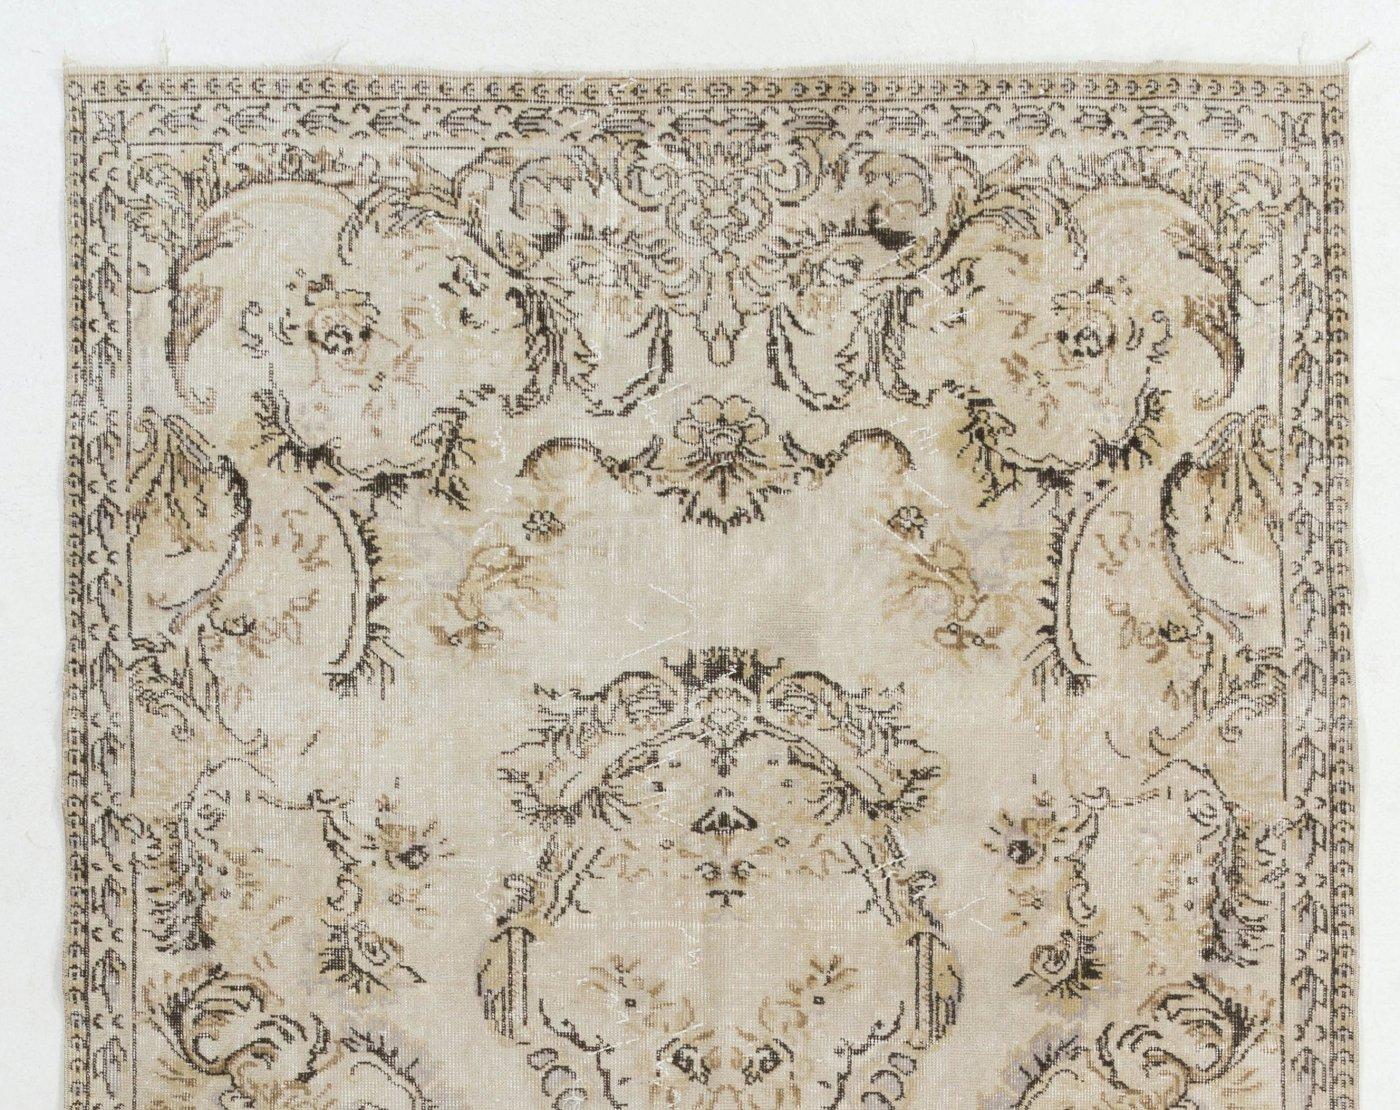 A vintage hand-knotted Turkish area rug from the 1960s that features a French-Aubusson inspired design of lush floral and leafy motifs made into stylized wreaths and cartouches arranged around the inner edges of the border, surrounding a central